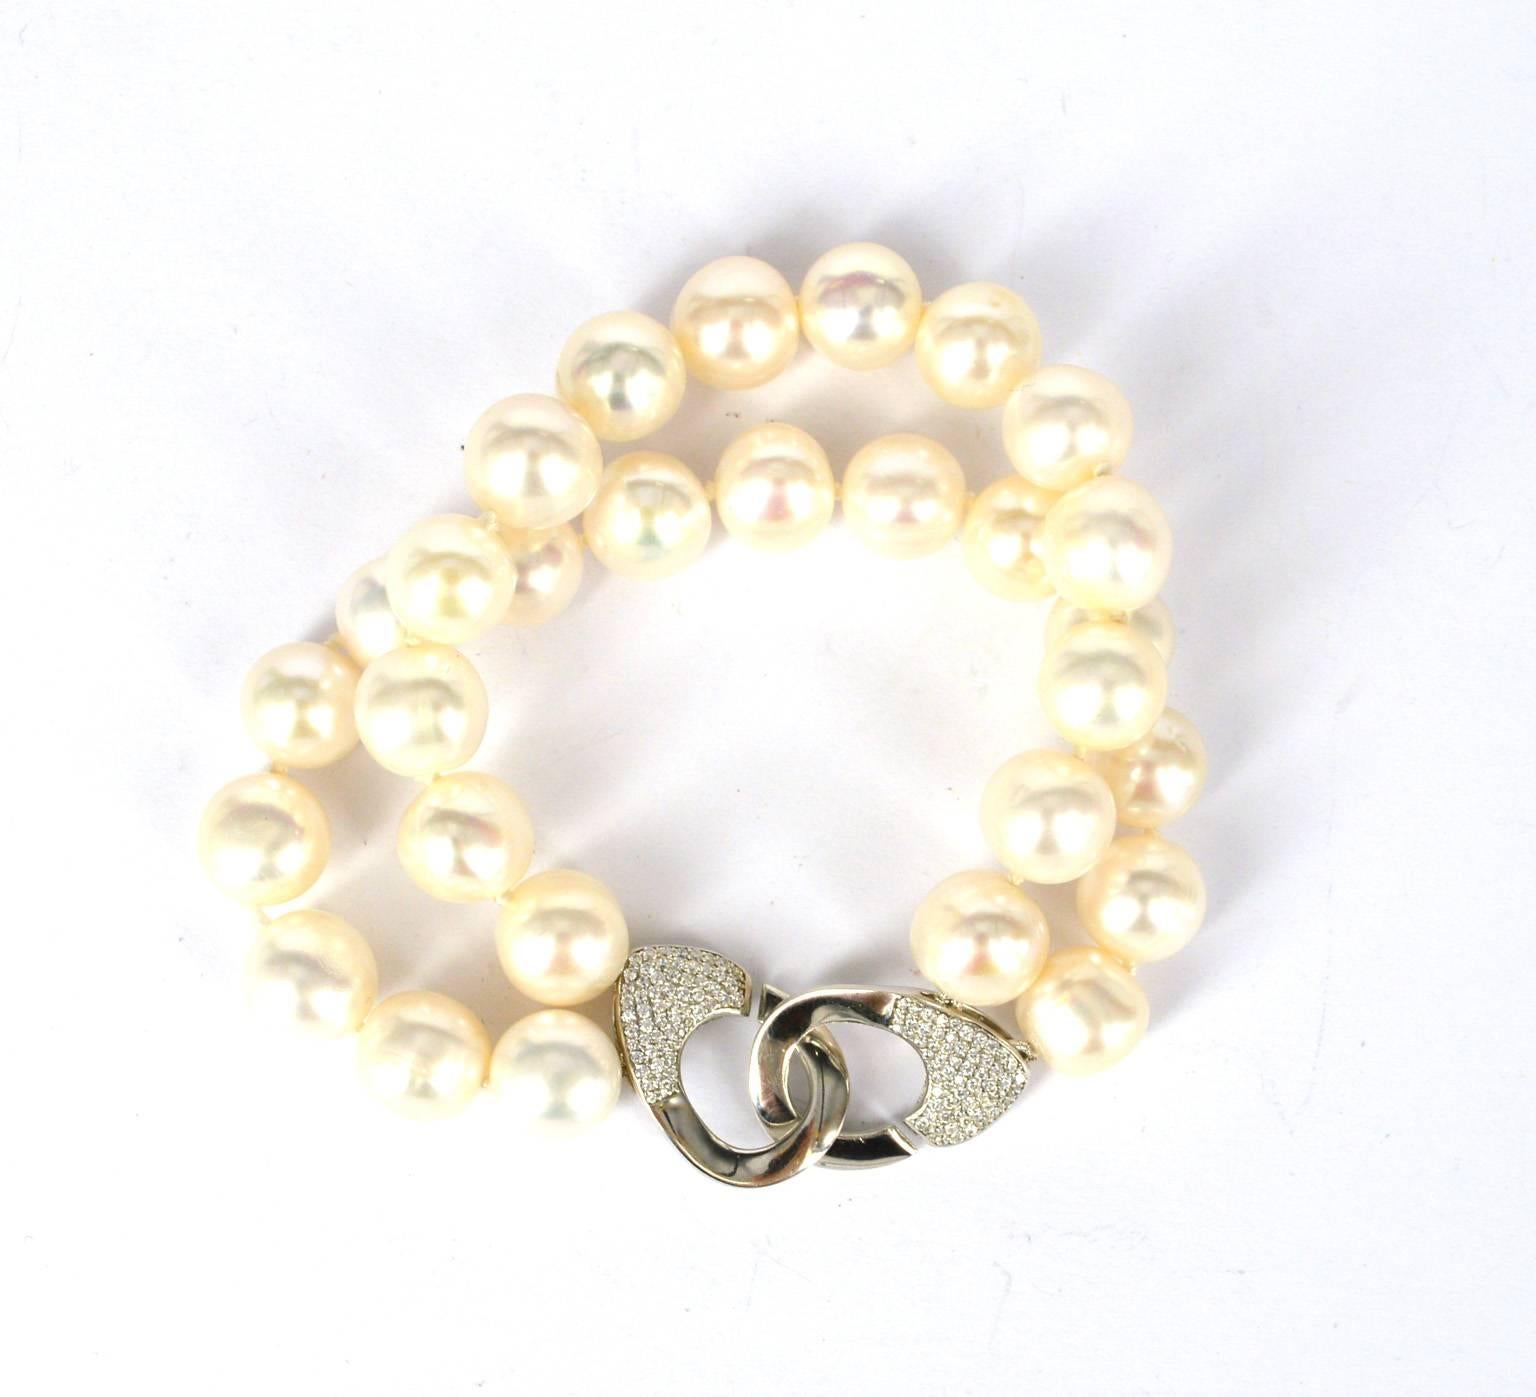 2 strands of nearly round 11mm Fresh water white pearls, rhodium plate Sterling Silver CZ clasp.
Fits wrist size 17cm. 
19.5cm in length